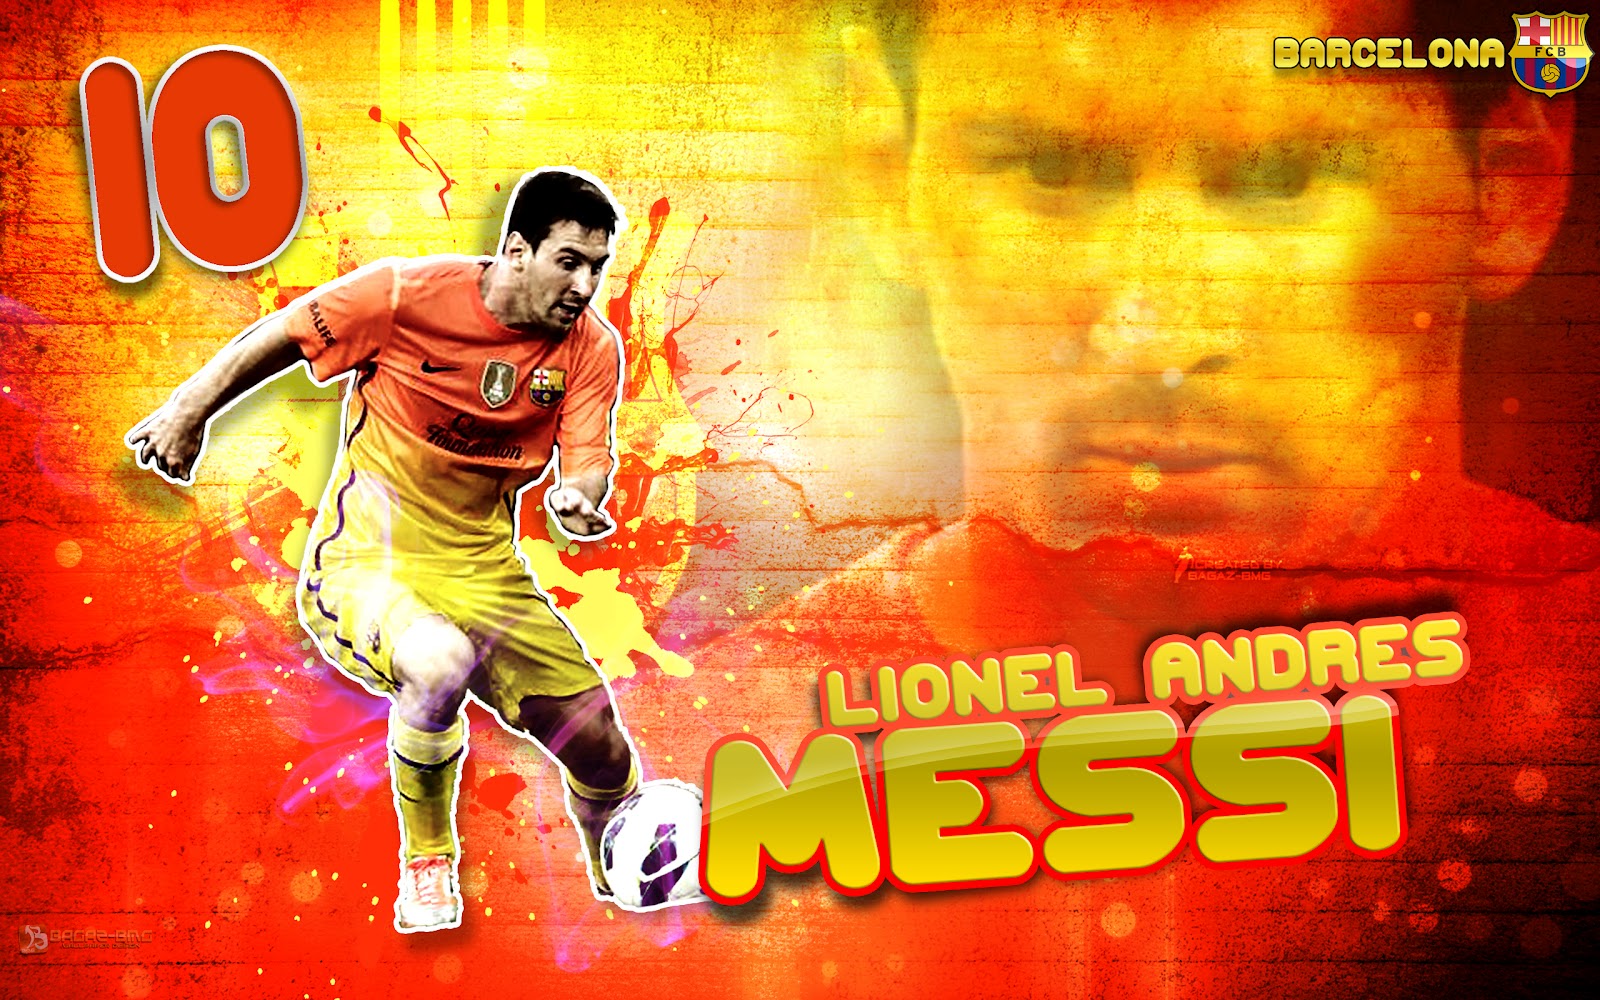 FOOTBALL SUPER STARS: Lionel Messi Fresh HD Wallpapers Only 2013